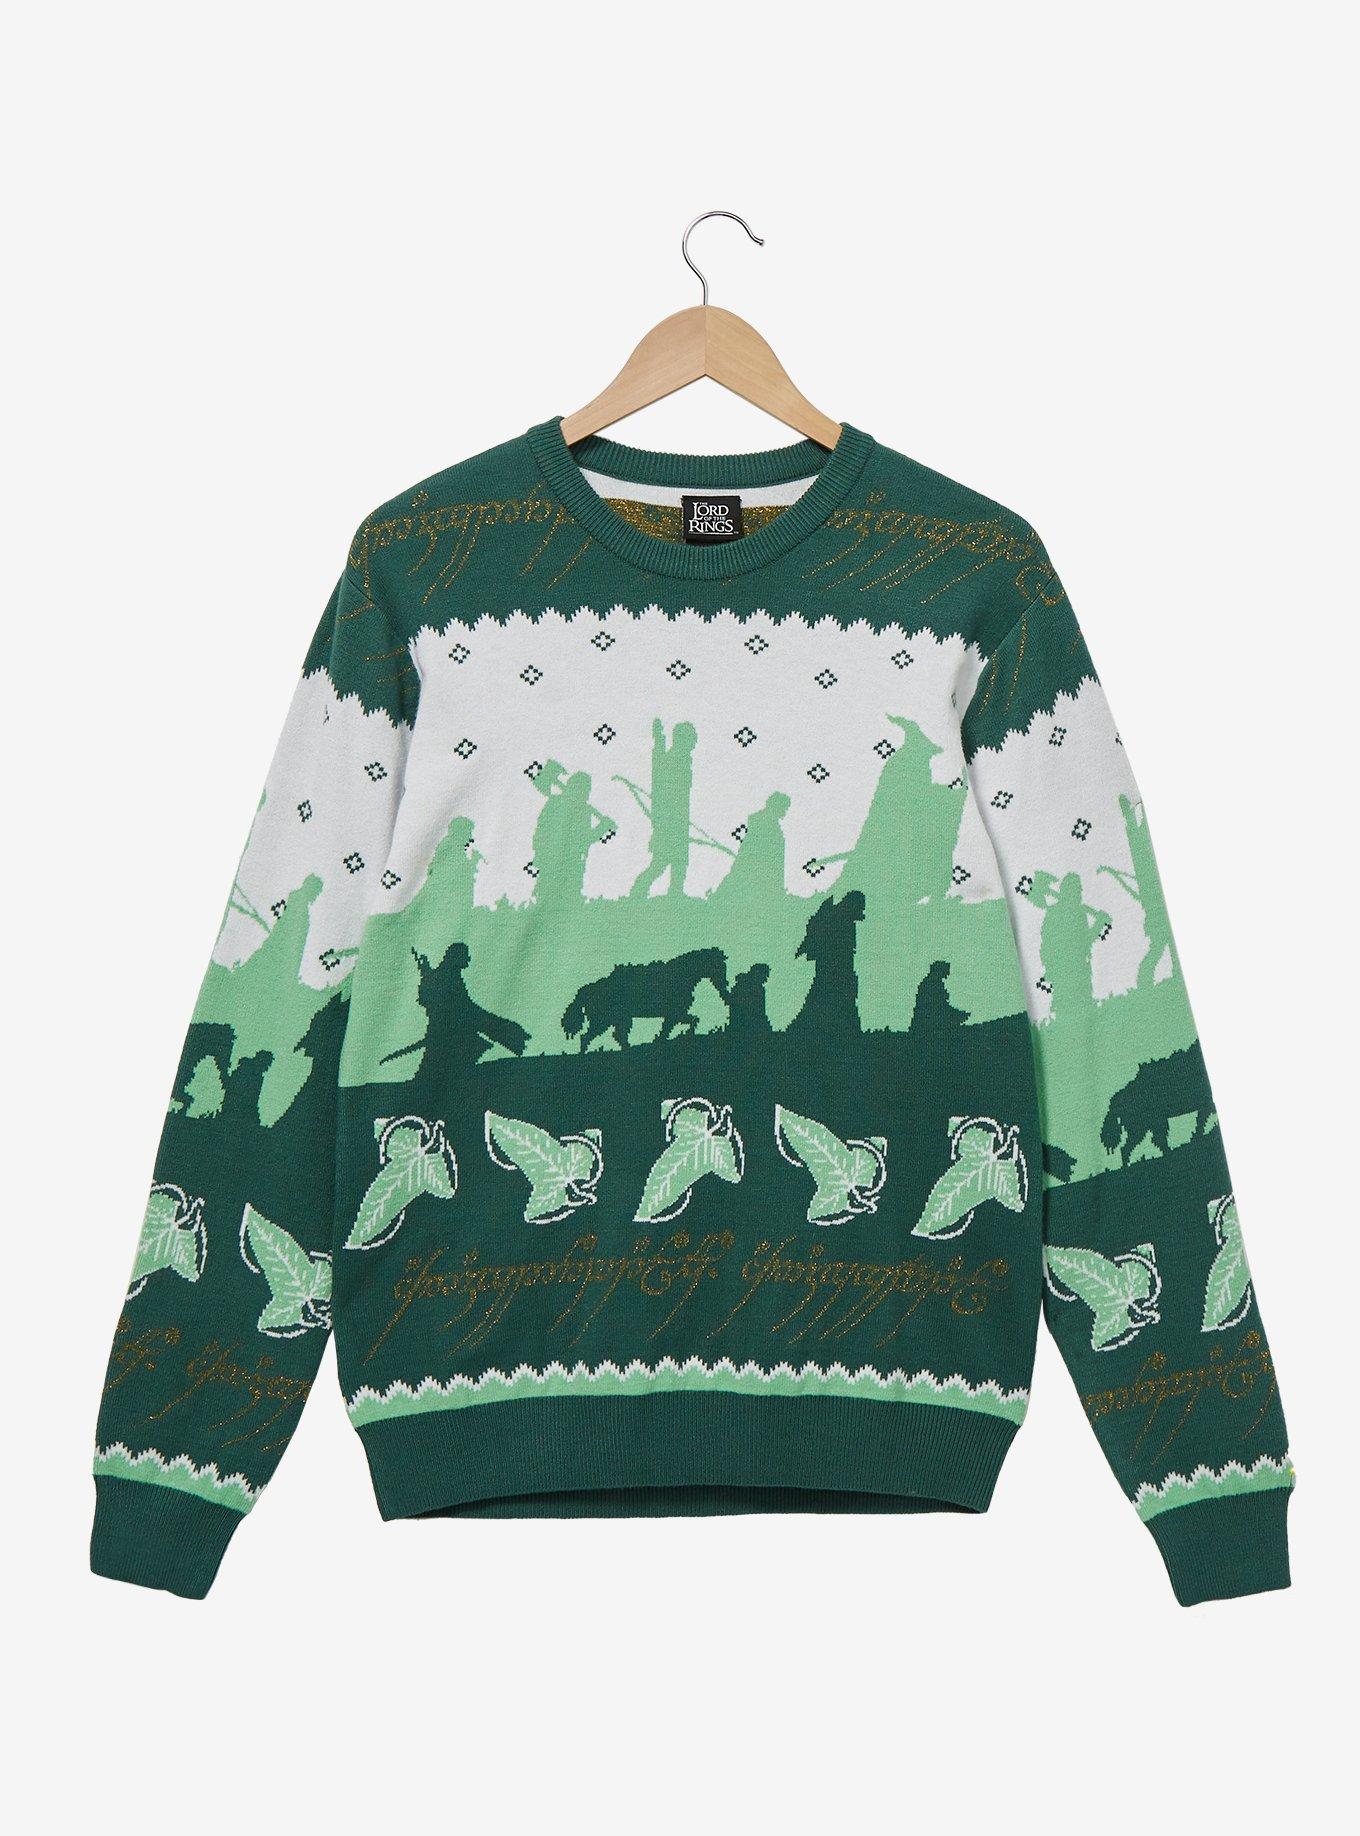 The Lord of the Rings Fellowship Silhouettes Holiday Sweater - BoxLunch Exclusive, GREEN, hi-res